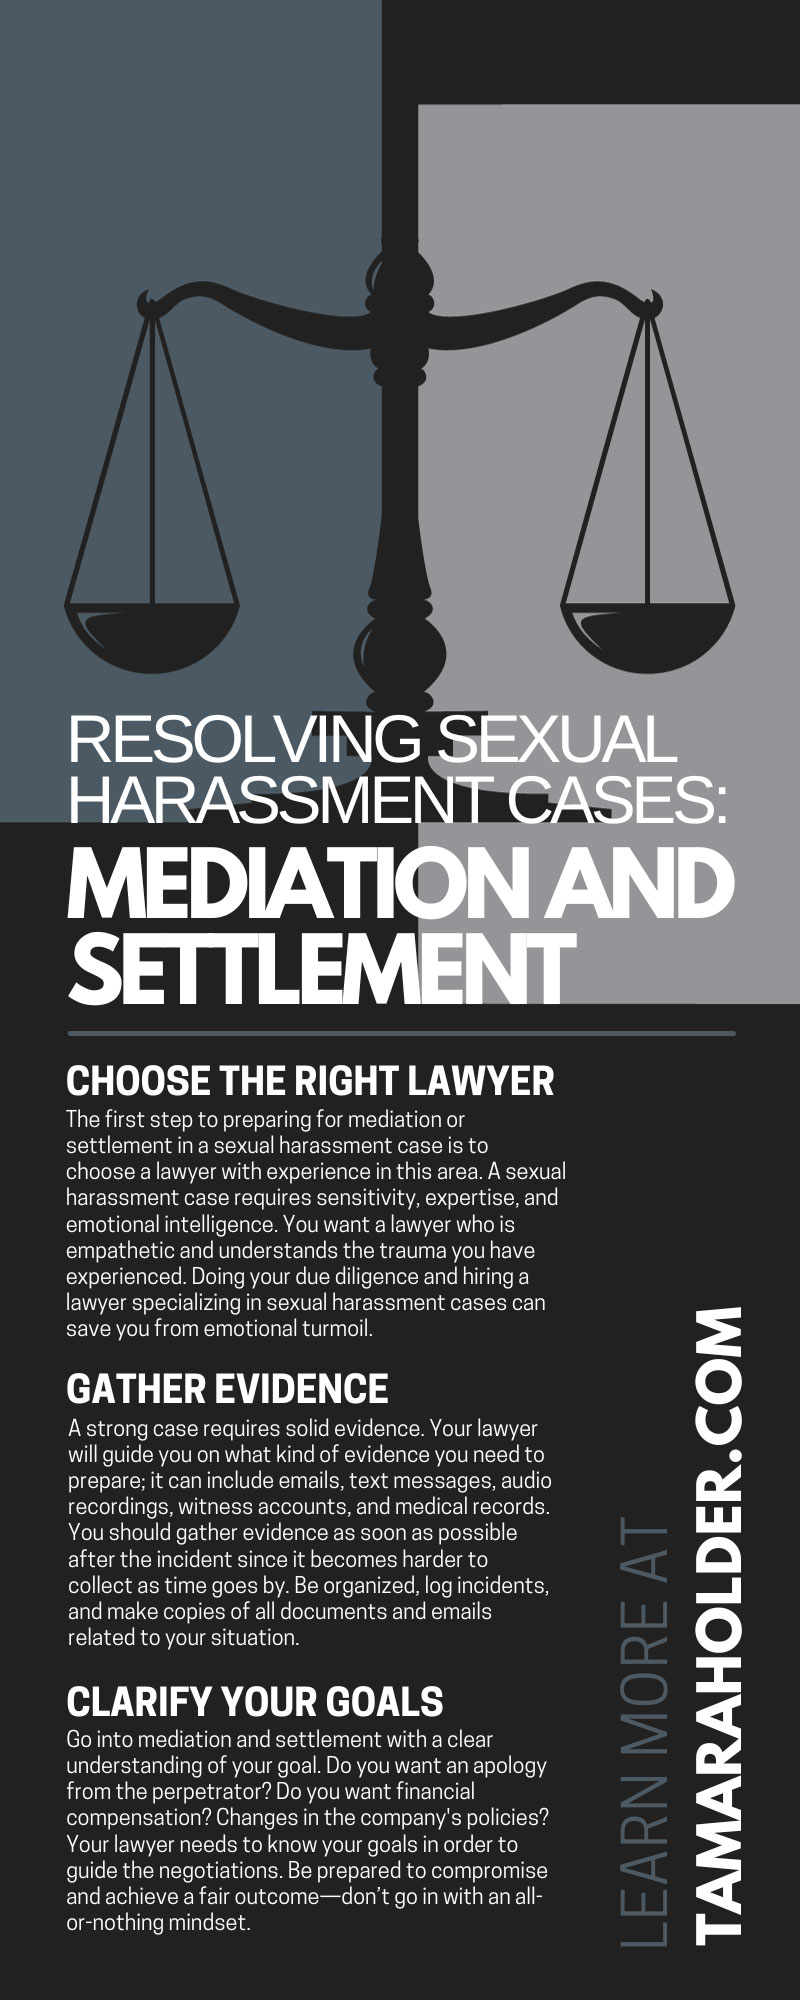 Resolving Sexual Harassment Cases: Mediation and Settlement